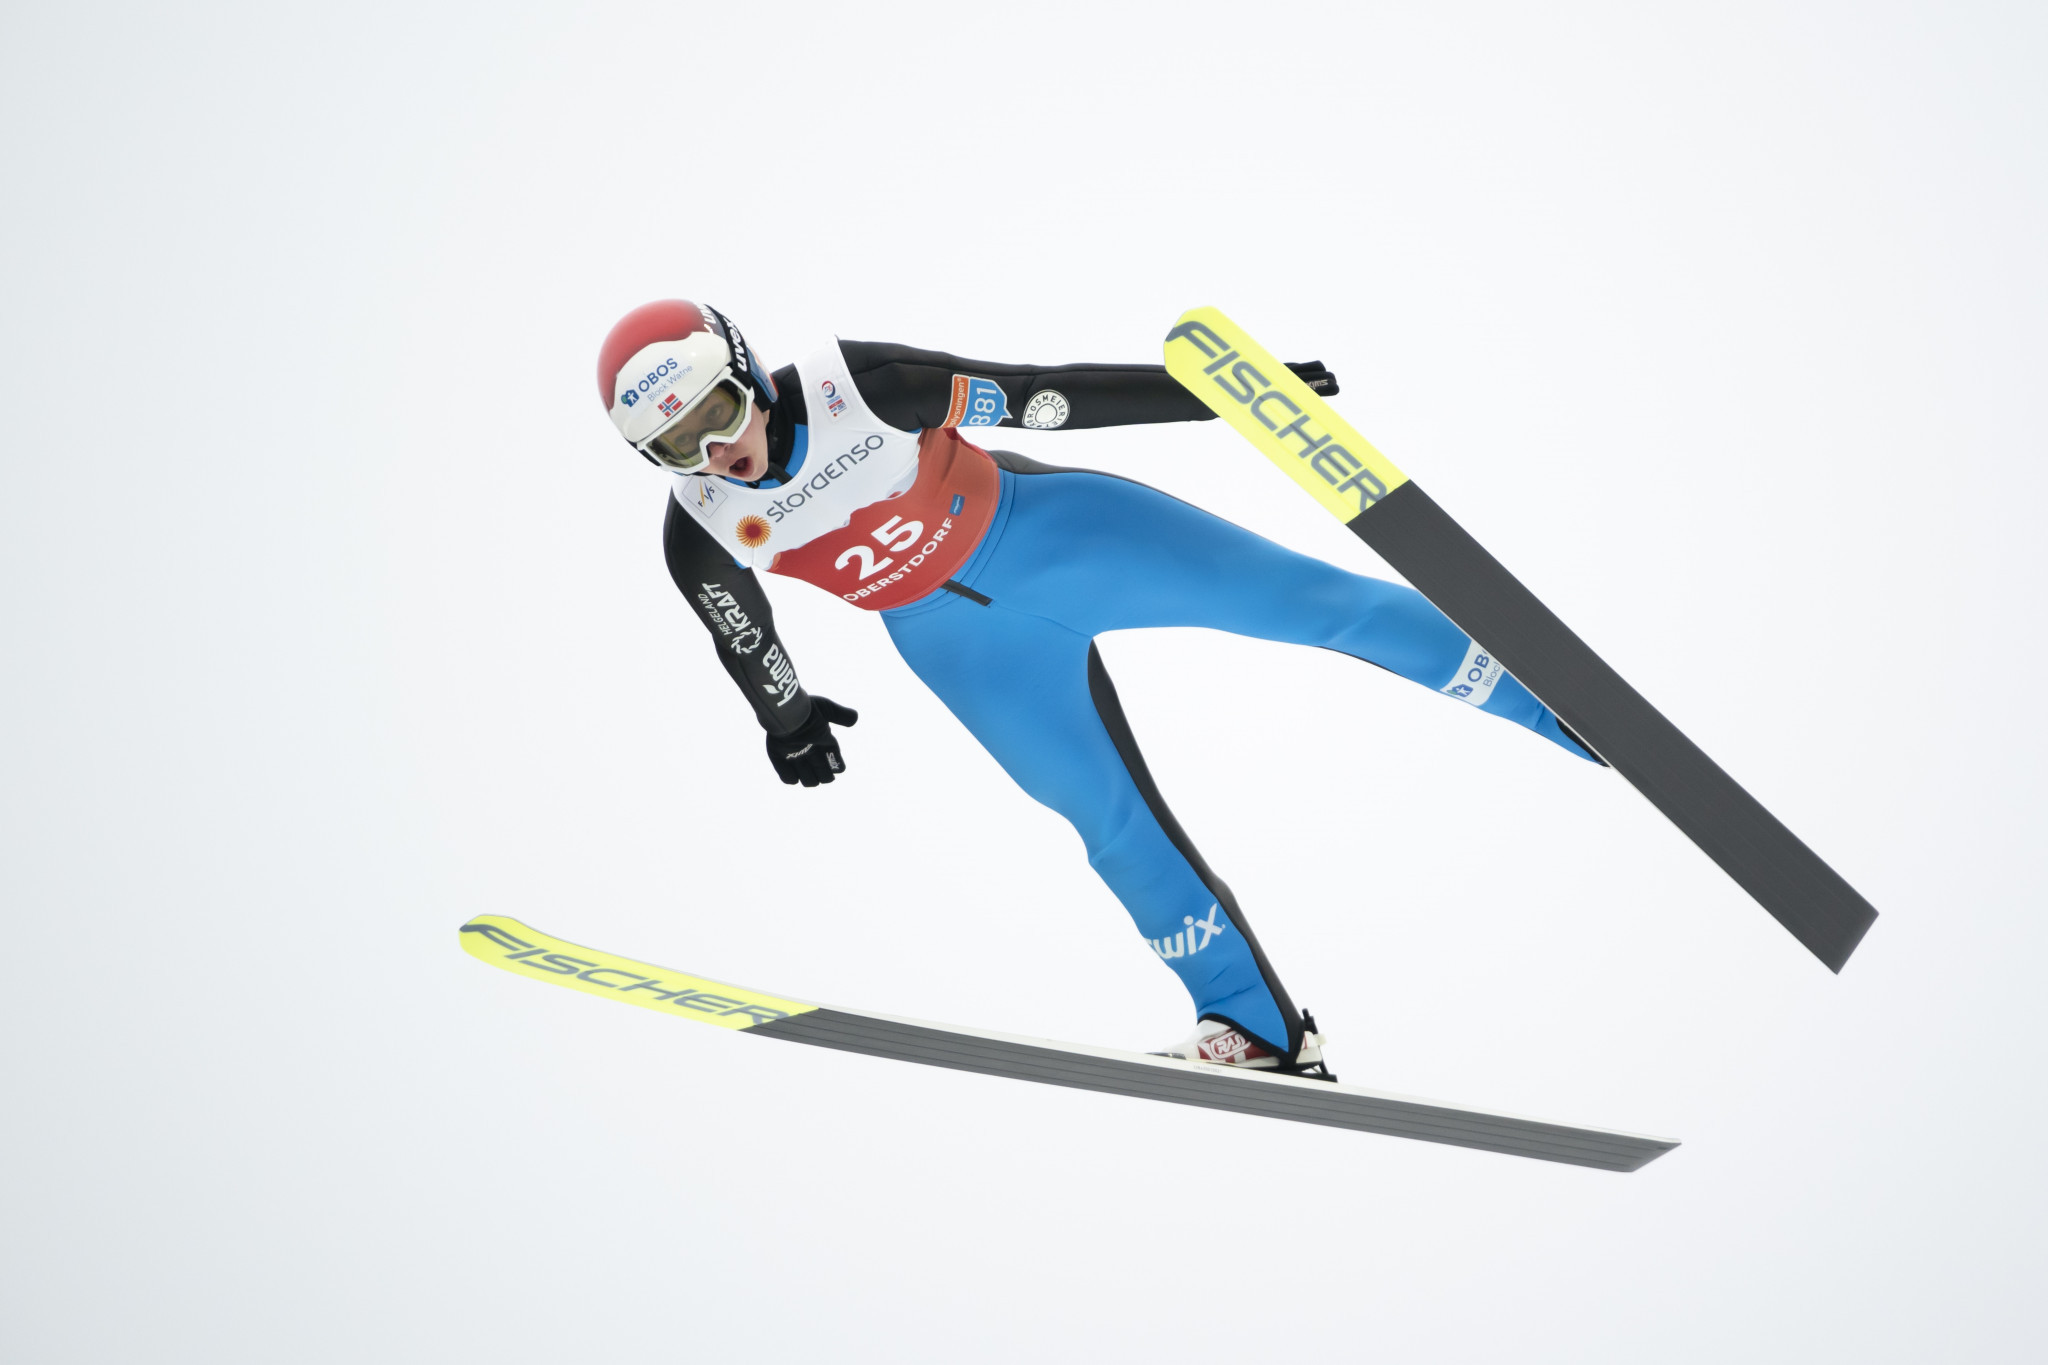 Gyda Westvold Hansen was the dominant athlete on the Nordic Combined World Cup circuit a season ago ©Getty Images